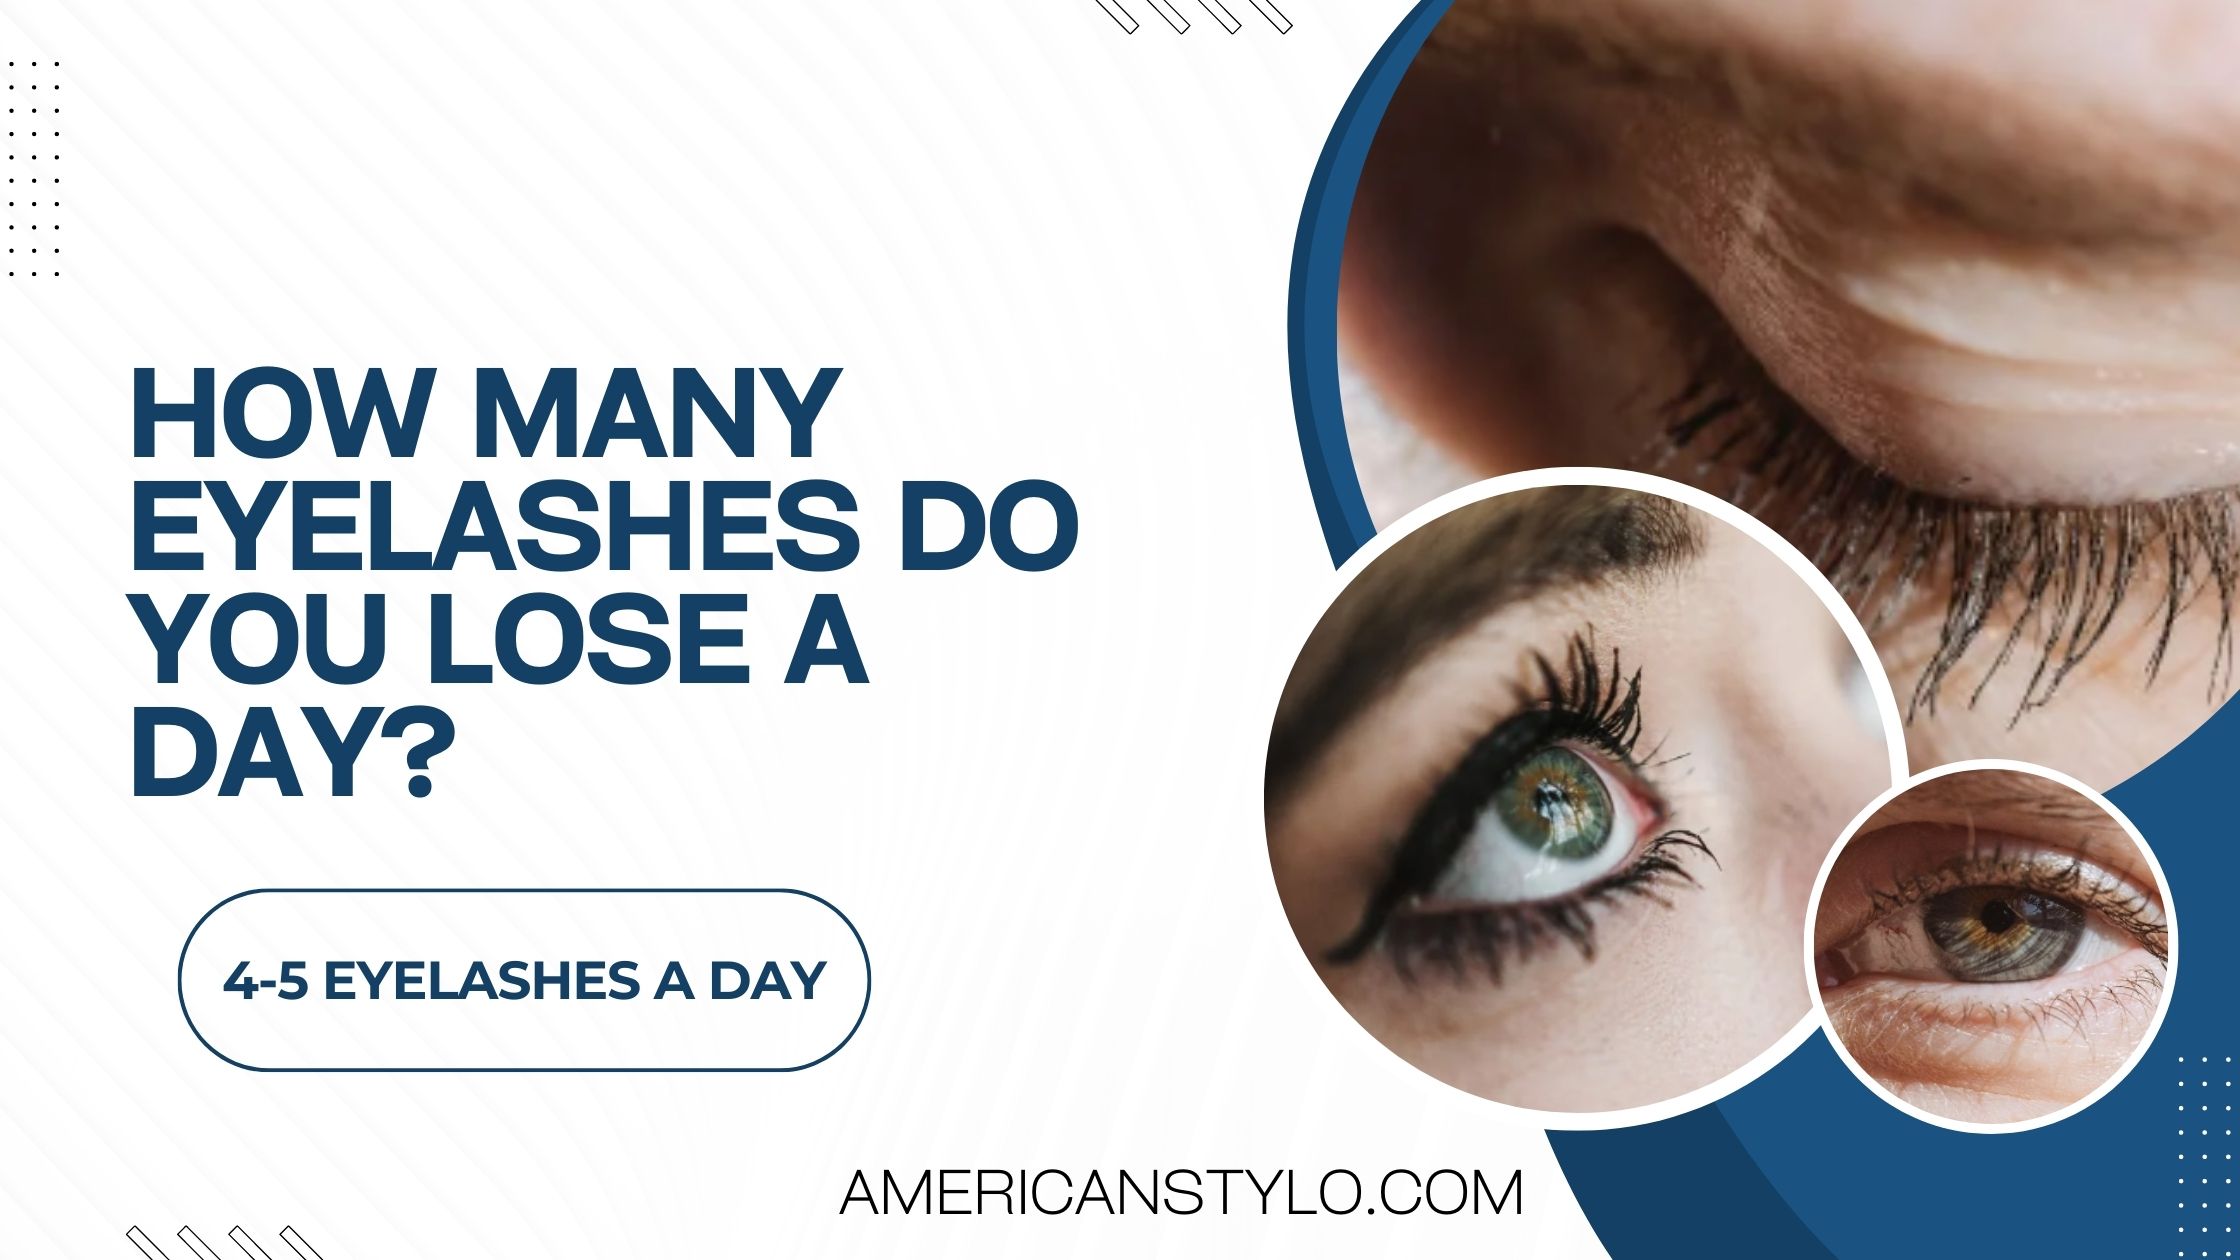 How many eyelashes do you lose a day